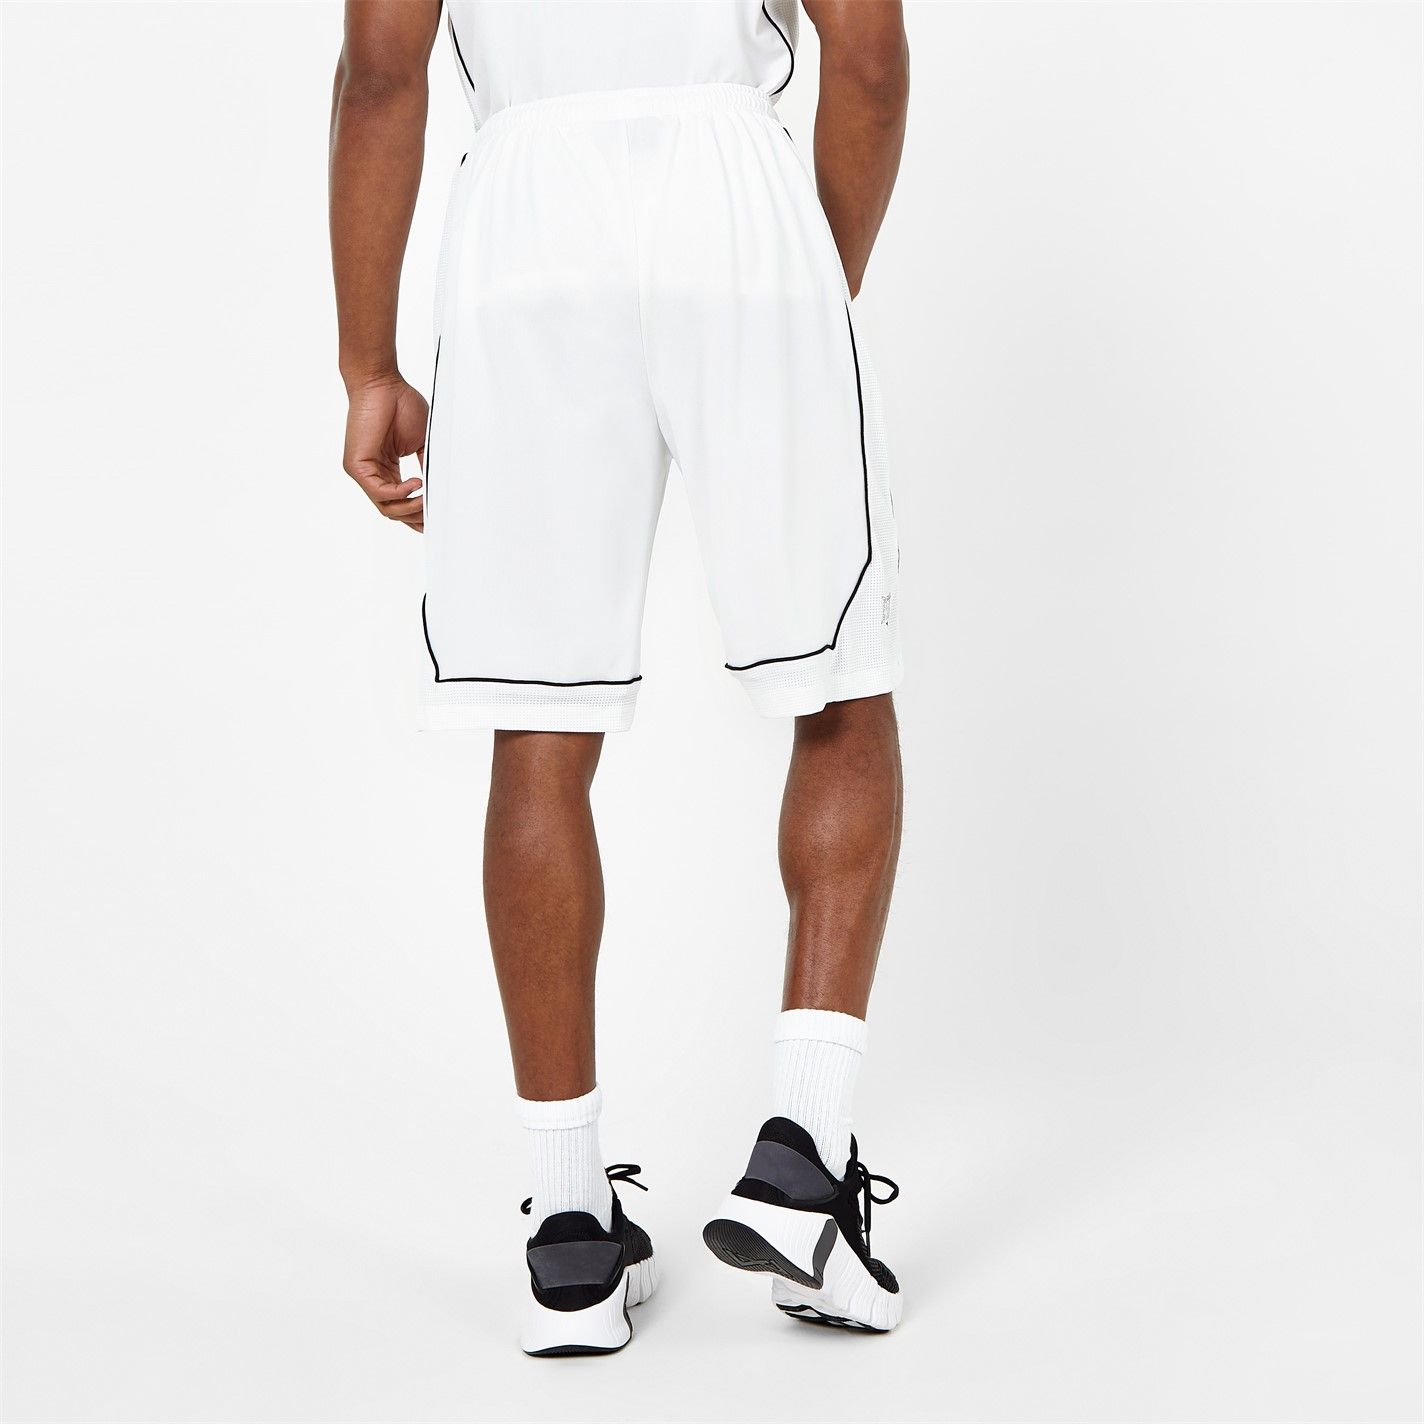 Play your favourite game in both comfort and style in these basketball shorts with modern piping detailing. It's all about teamwork, Everlast have collaborated with legend Ovie Soko for an unmissable and unbeatable collection. Crafted with an elasticated waistband, internal drawstring, double side pockets, breathable mesh panelling to either side and an Everlast branding badge on the back. These are a contemporary pair, perfect for on the court and will help you achieve your potential. Now is the time to go above and beyond!  >Elasticated waistband  >Internal drawstring  >Loose fitting  >2 open side pockets  >Mesh panelling  >Everlast branding  >100% Polyester Jacquard  >Machine washable  >Keep away from fire